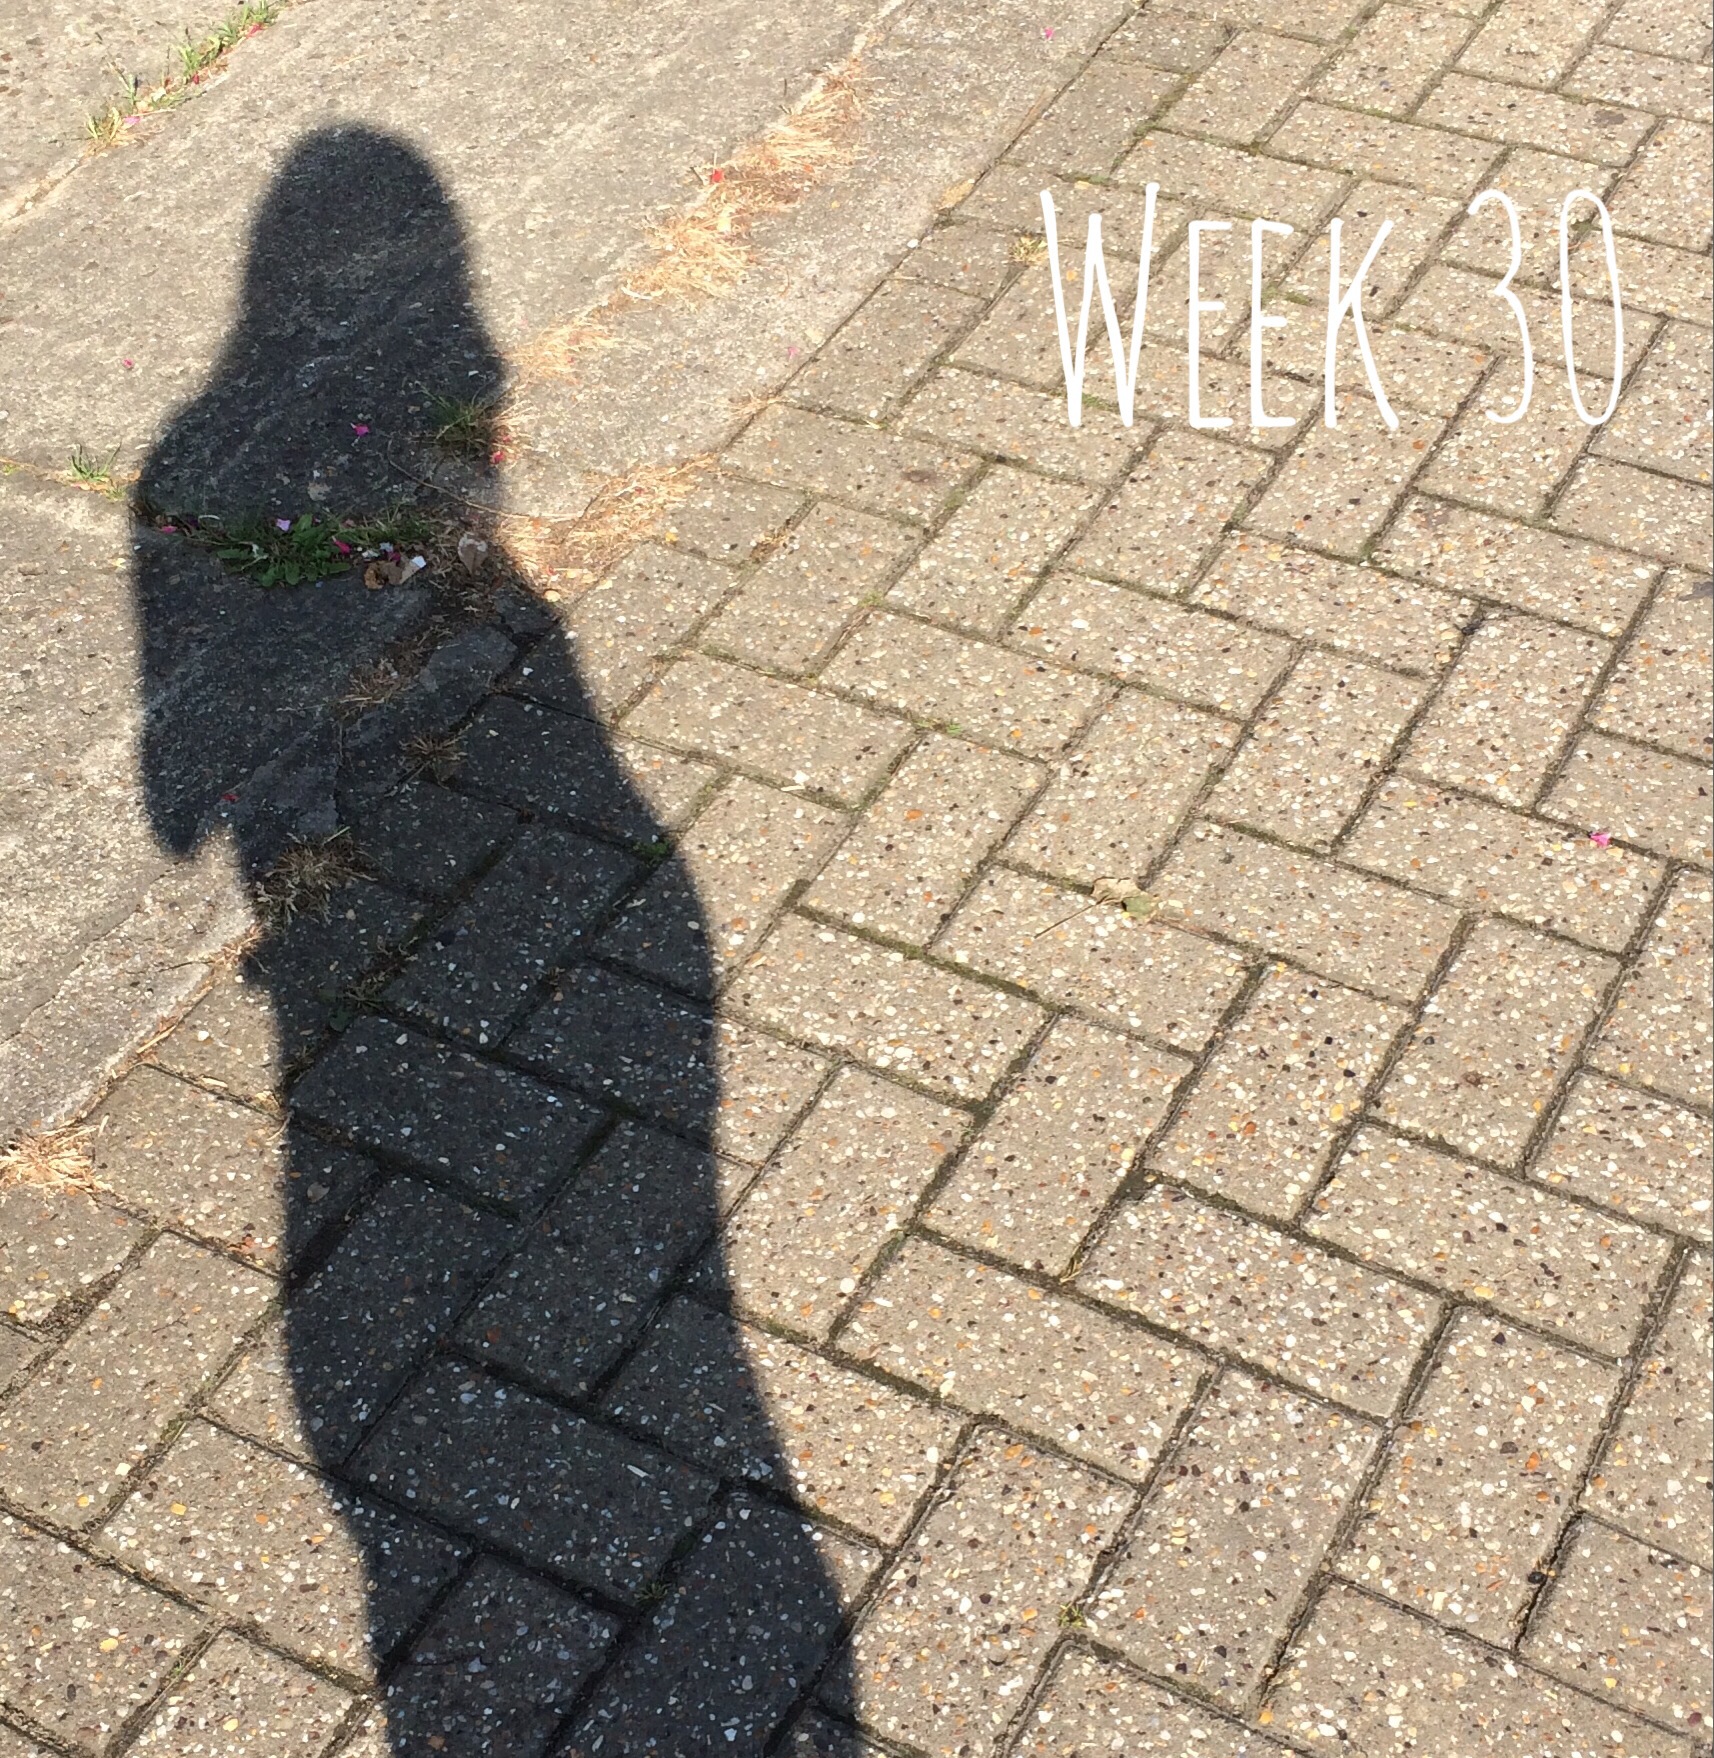 30 weeks pregnant - a pregnancy update in the third trimester